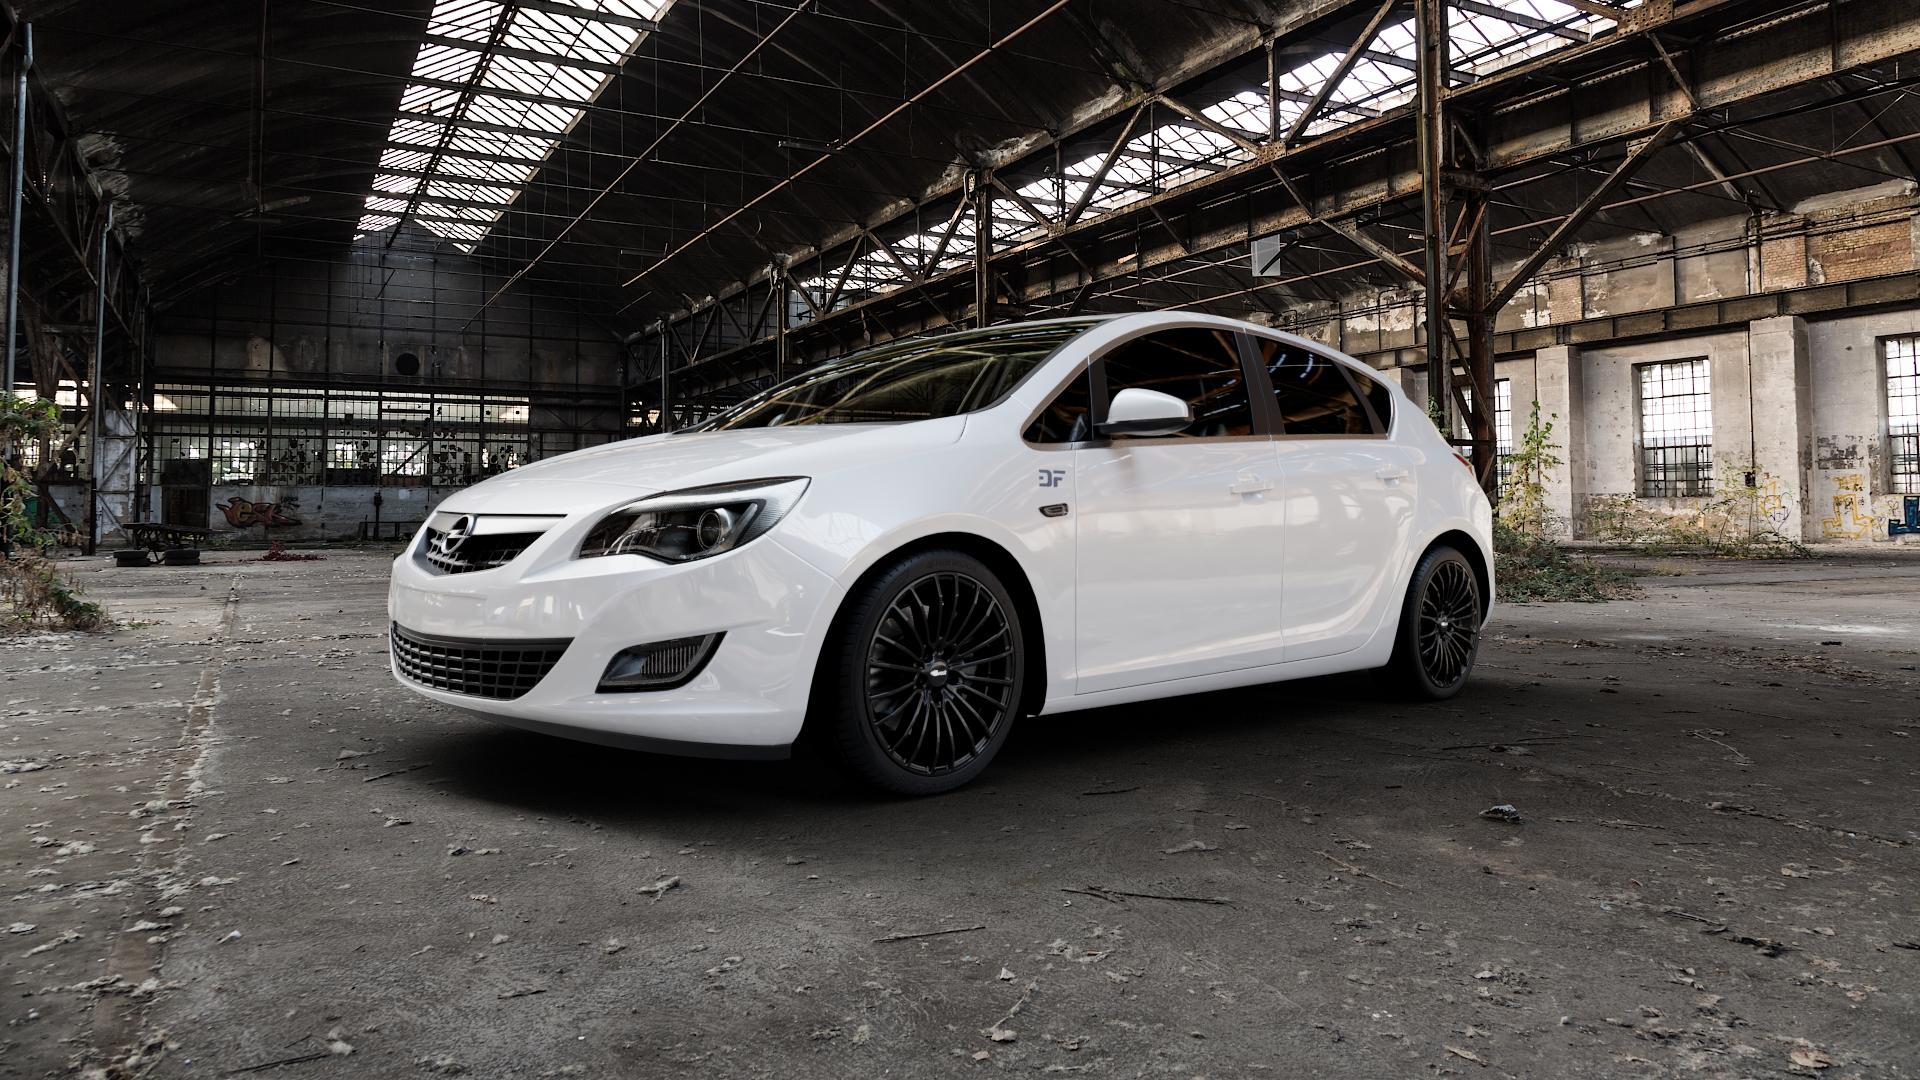 Opel Astra J Notchback Type P-J 1,7l CDTI ecoFLEX 96kW (131 hp) Wheels and  Tyre Packages